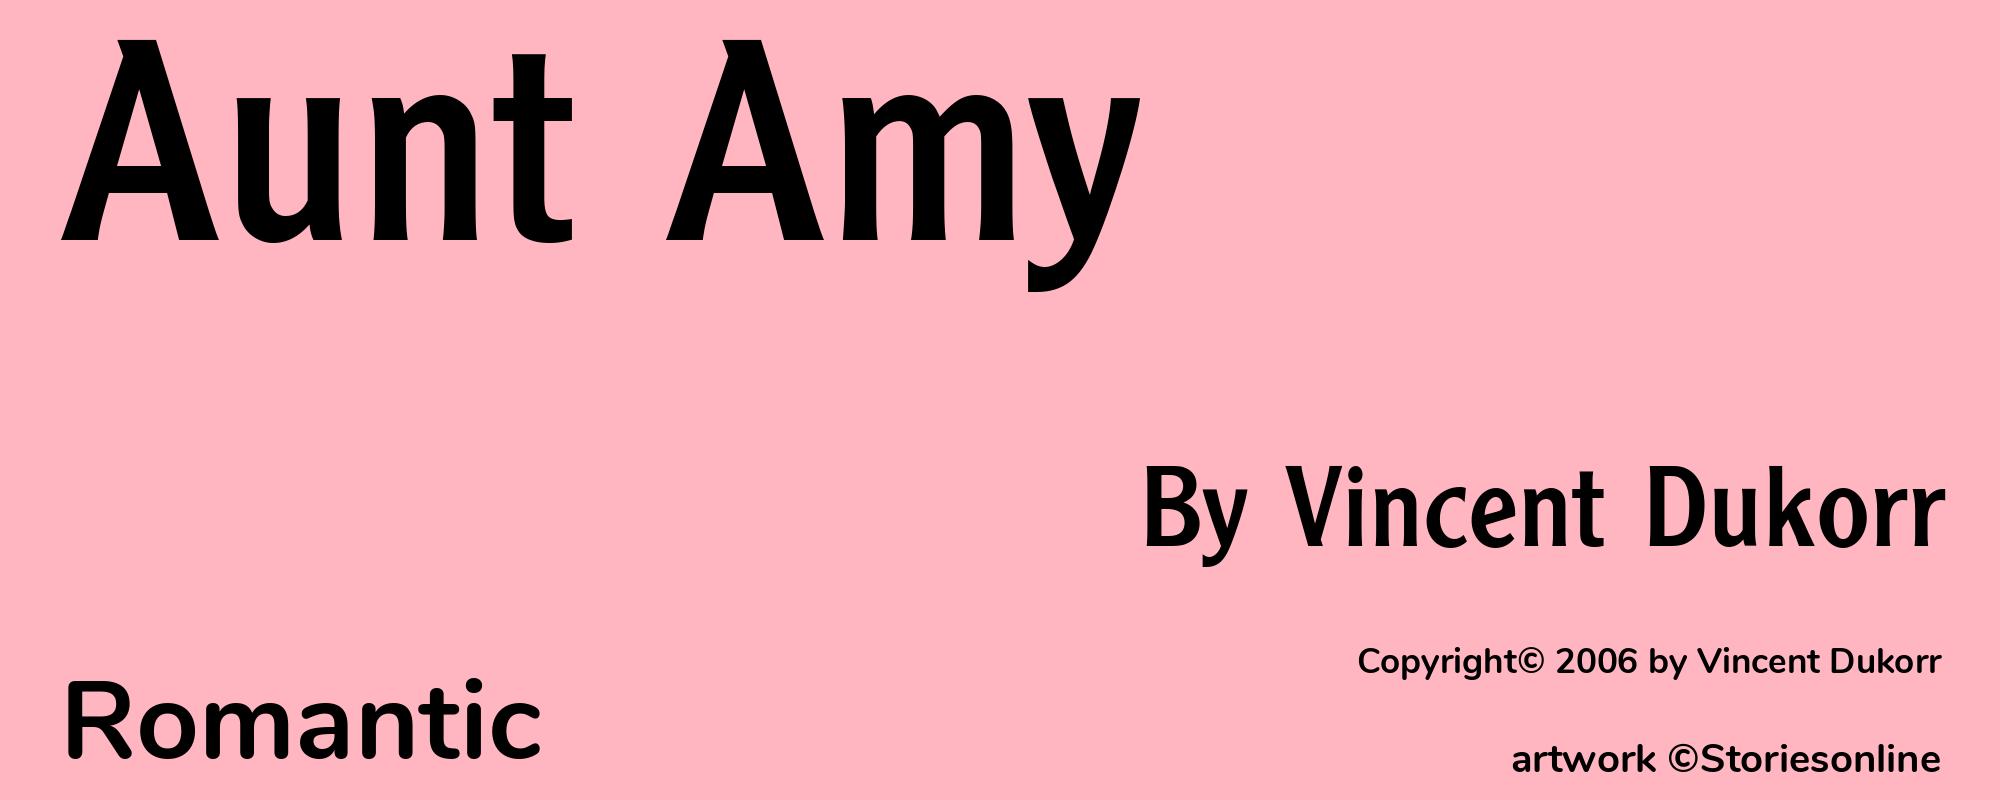 Aunt Amy - Cover